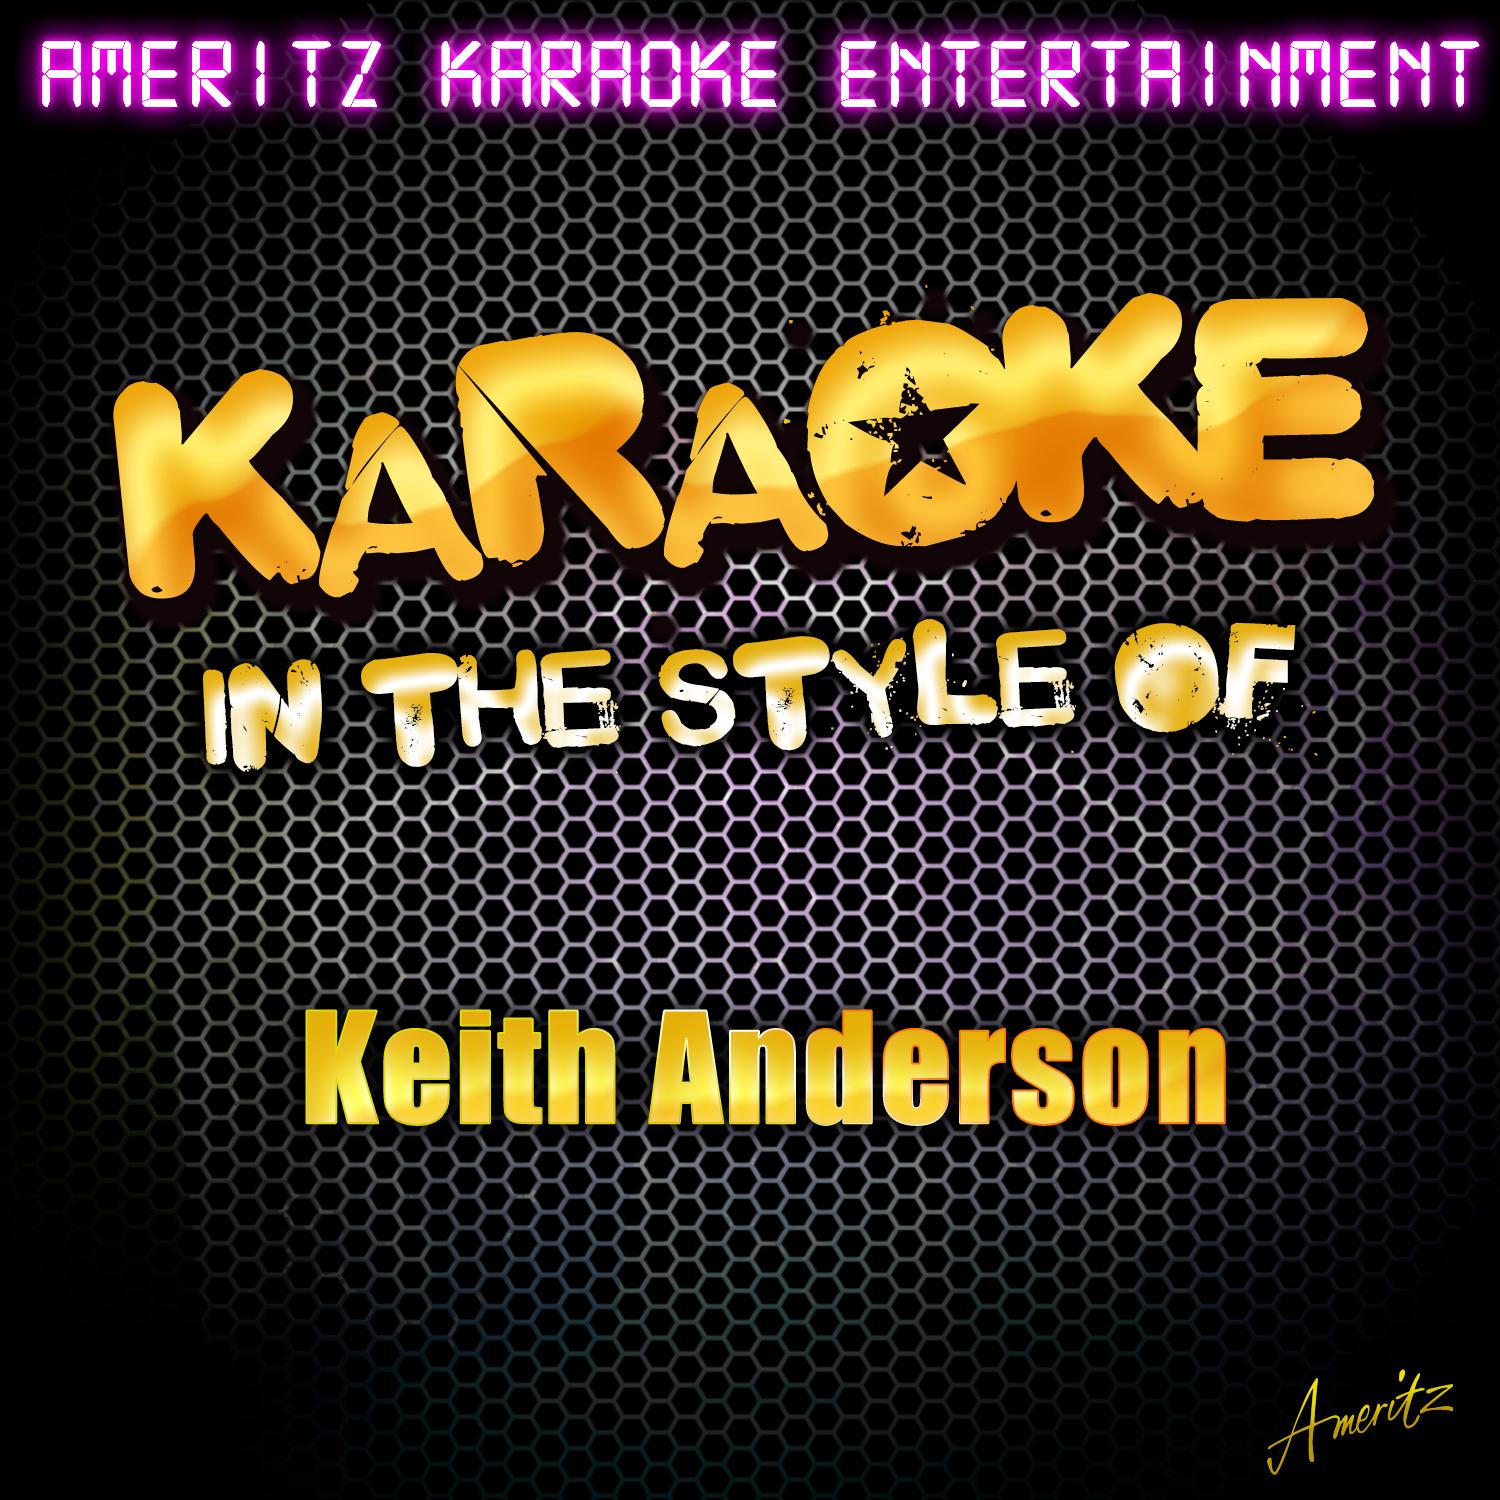 Karaoke (In the Style of Keith Anderson)